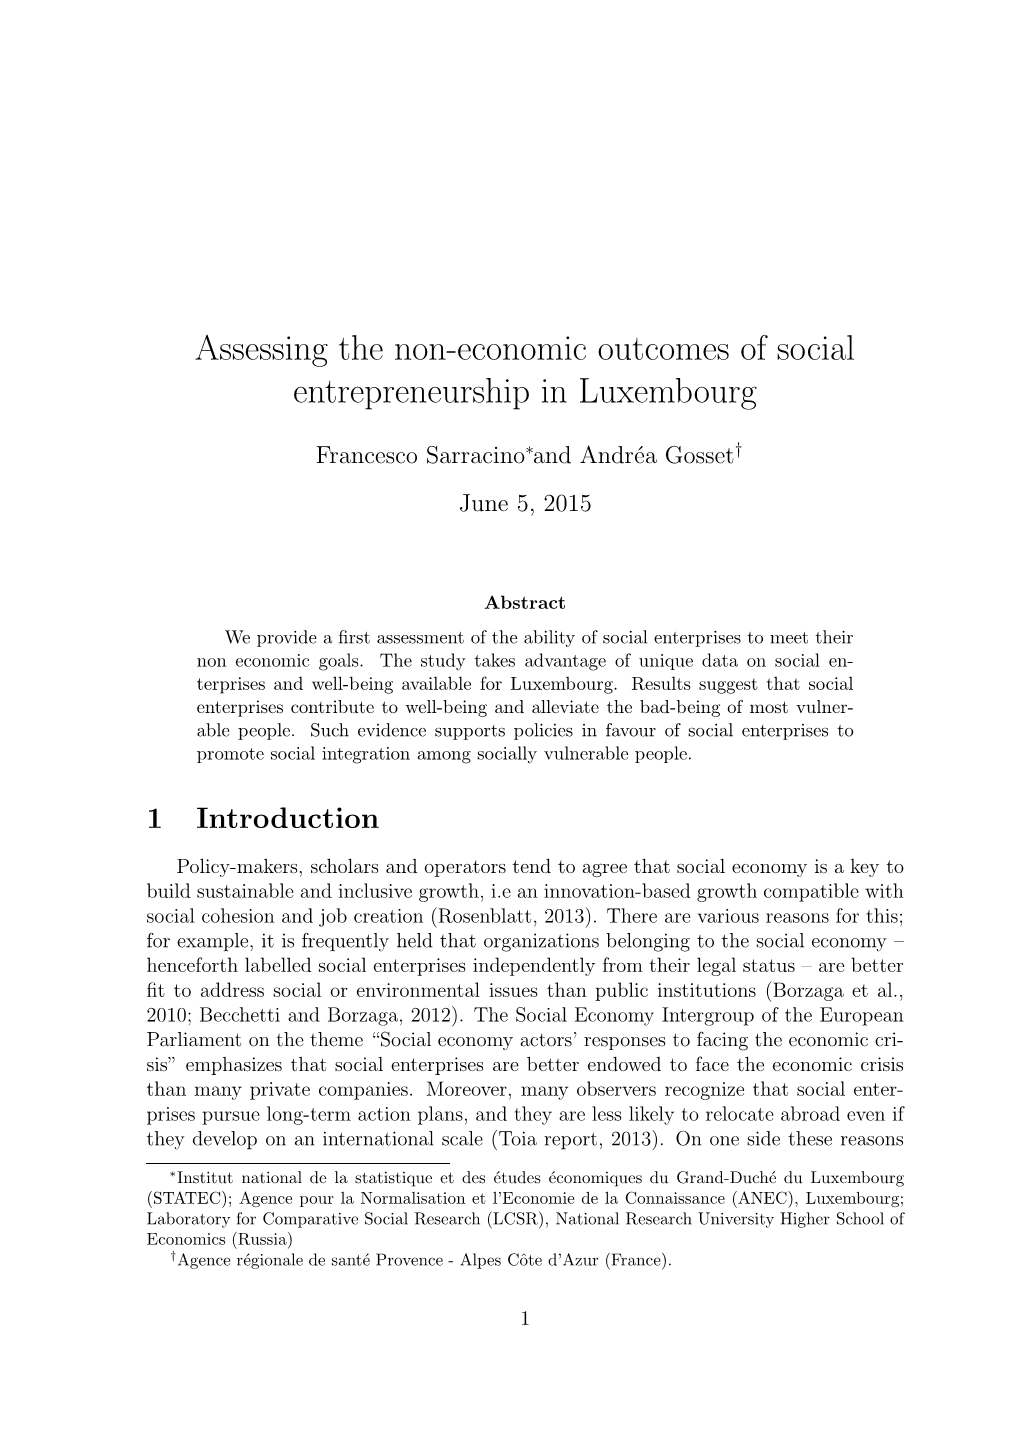 Assessing the Non-Economic Outcomes of Social Entrepreneurship in Luxembourg